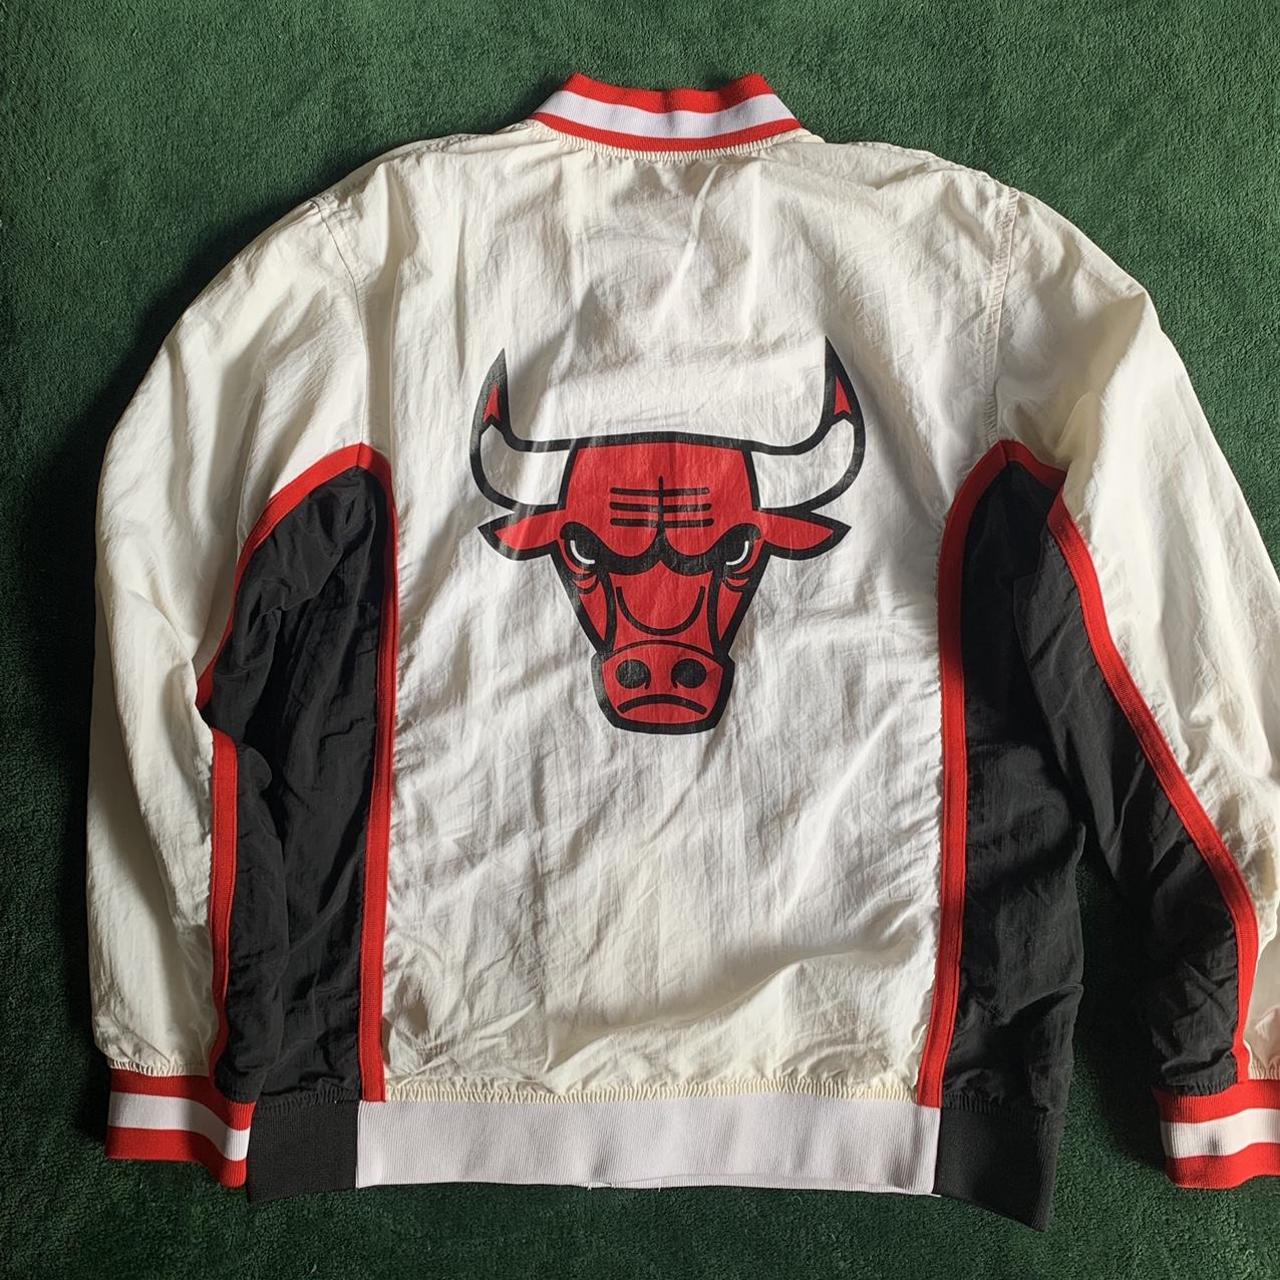 Buy NBA AUTHENTIC CHICAGO BULLS 1992 - 93 WARM UP JACKETS for N/A